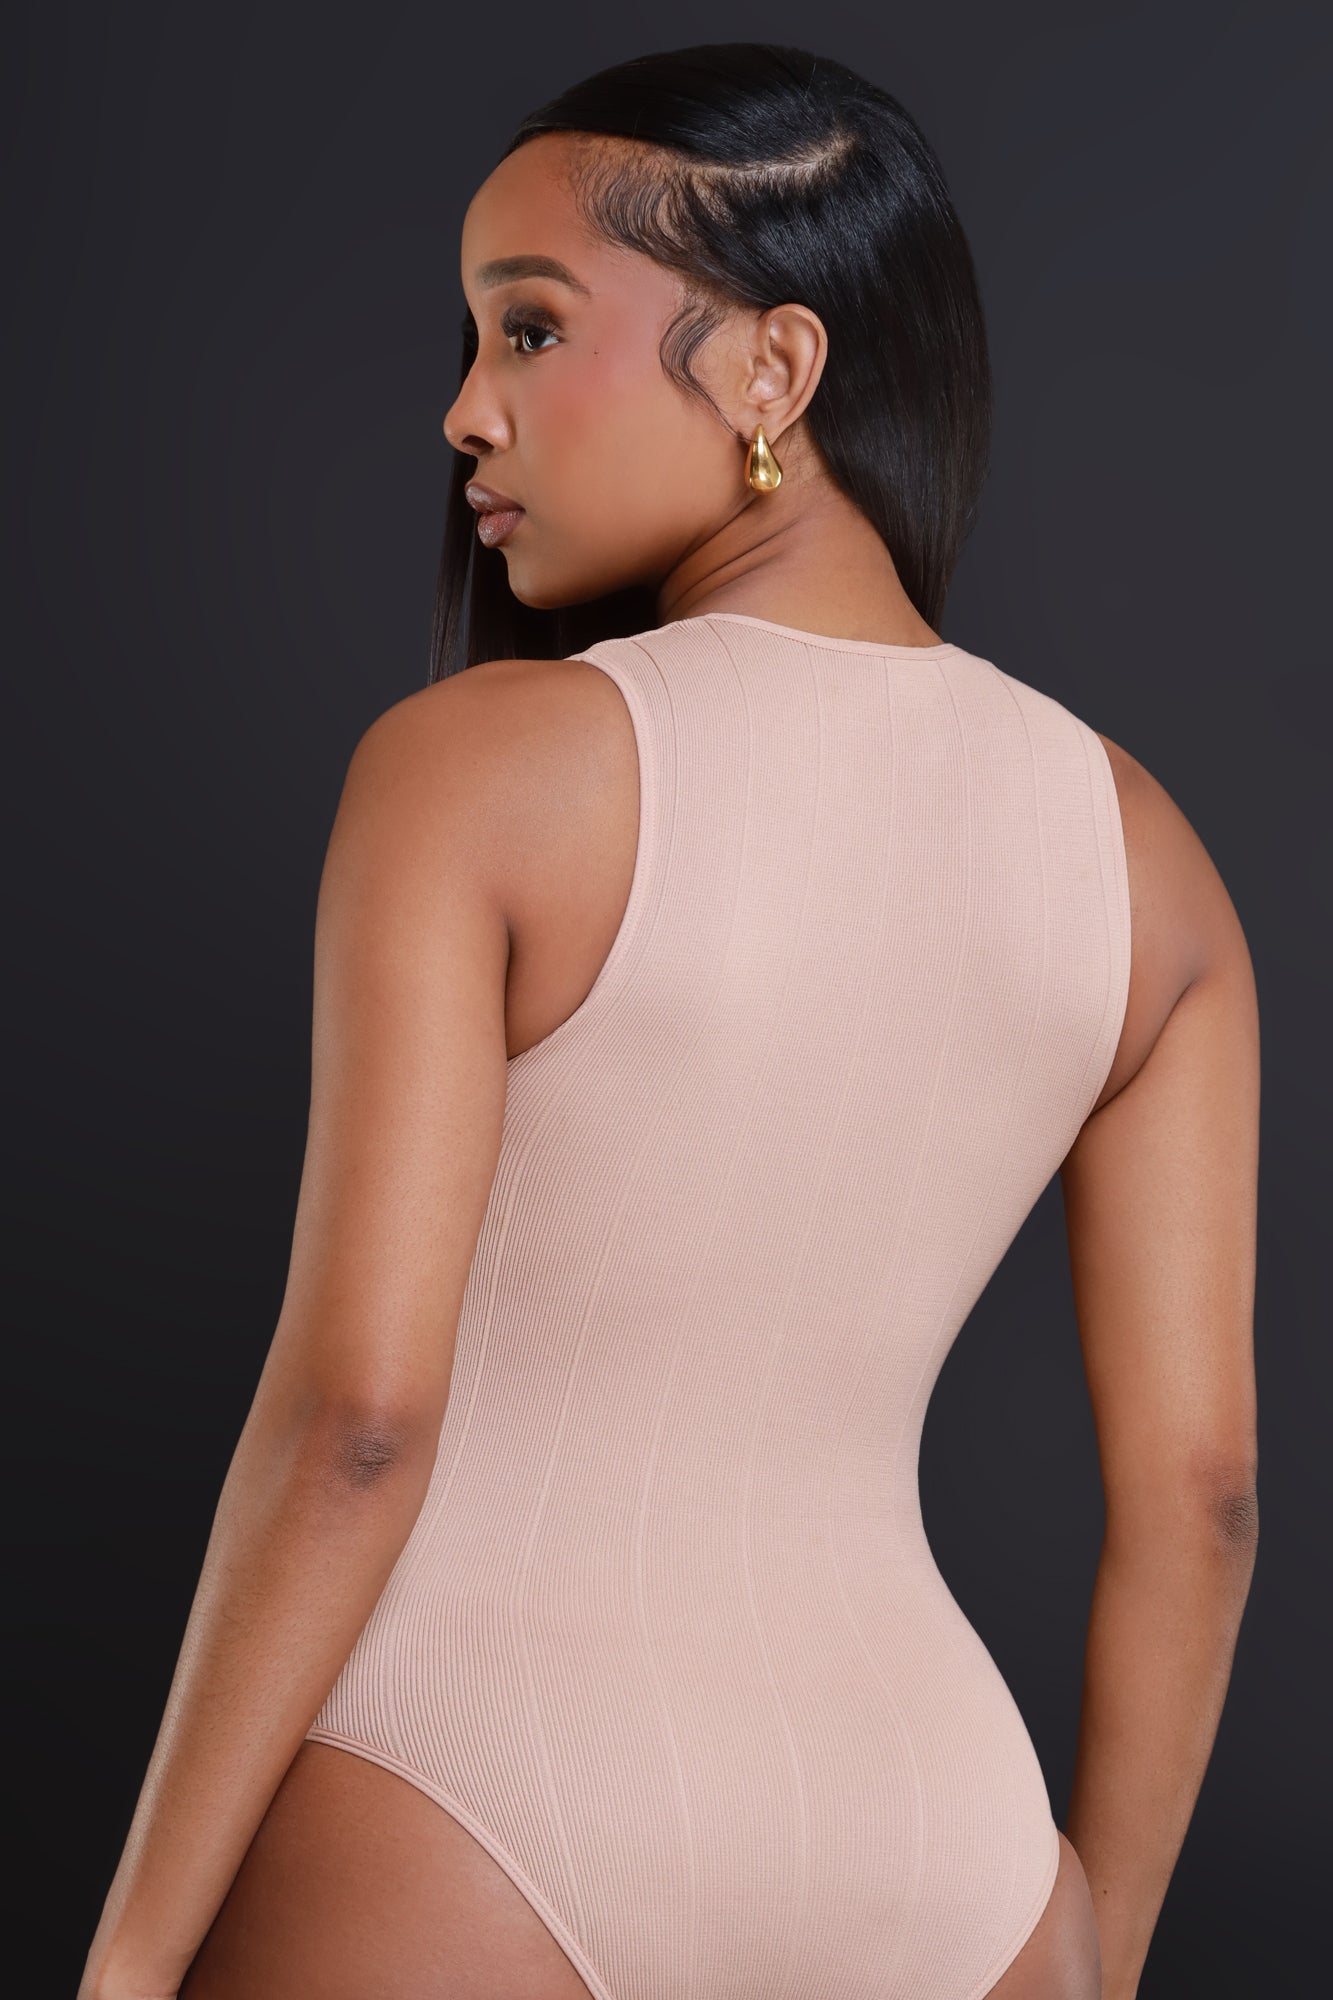 Shop for Taupe Bodysuits